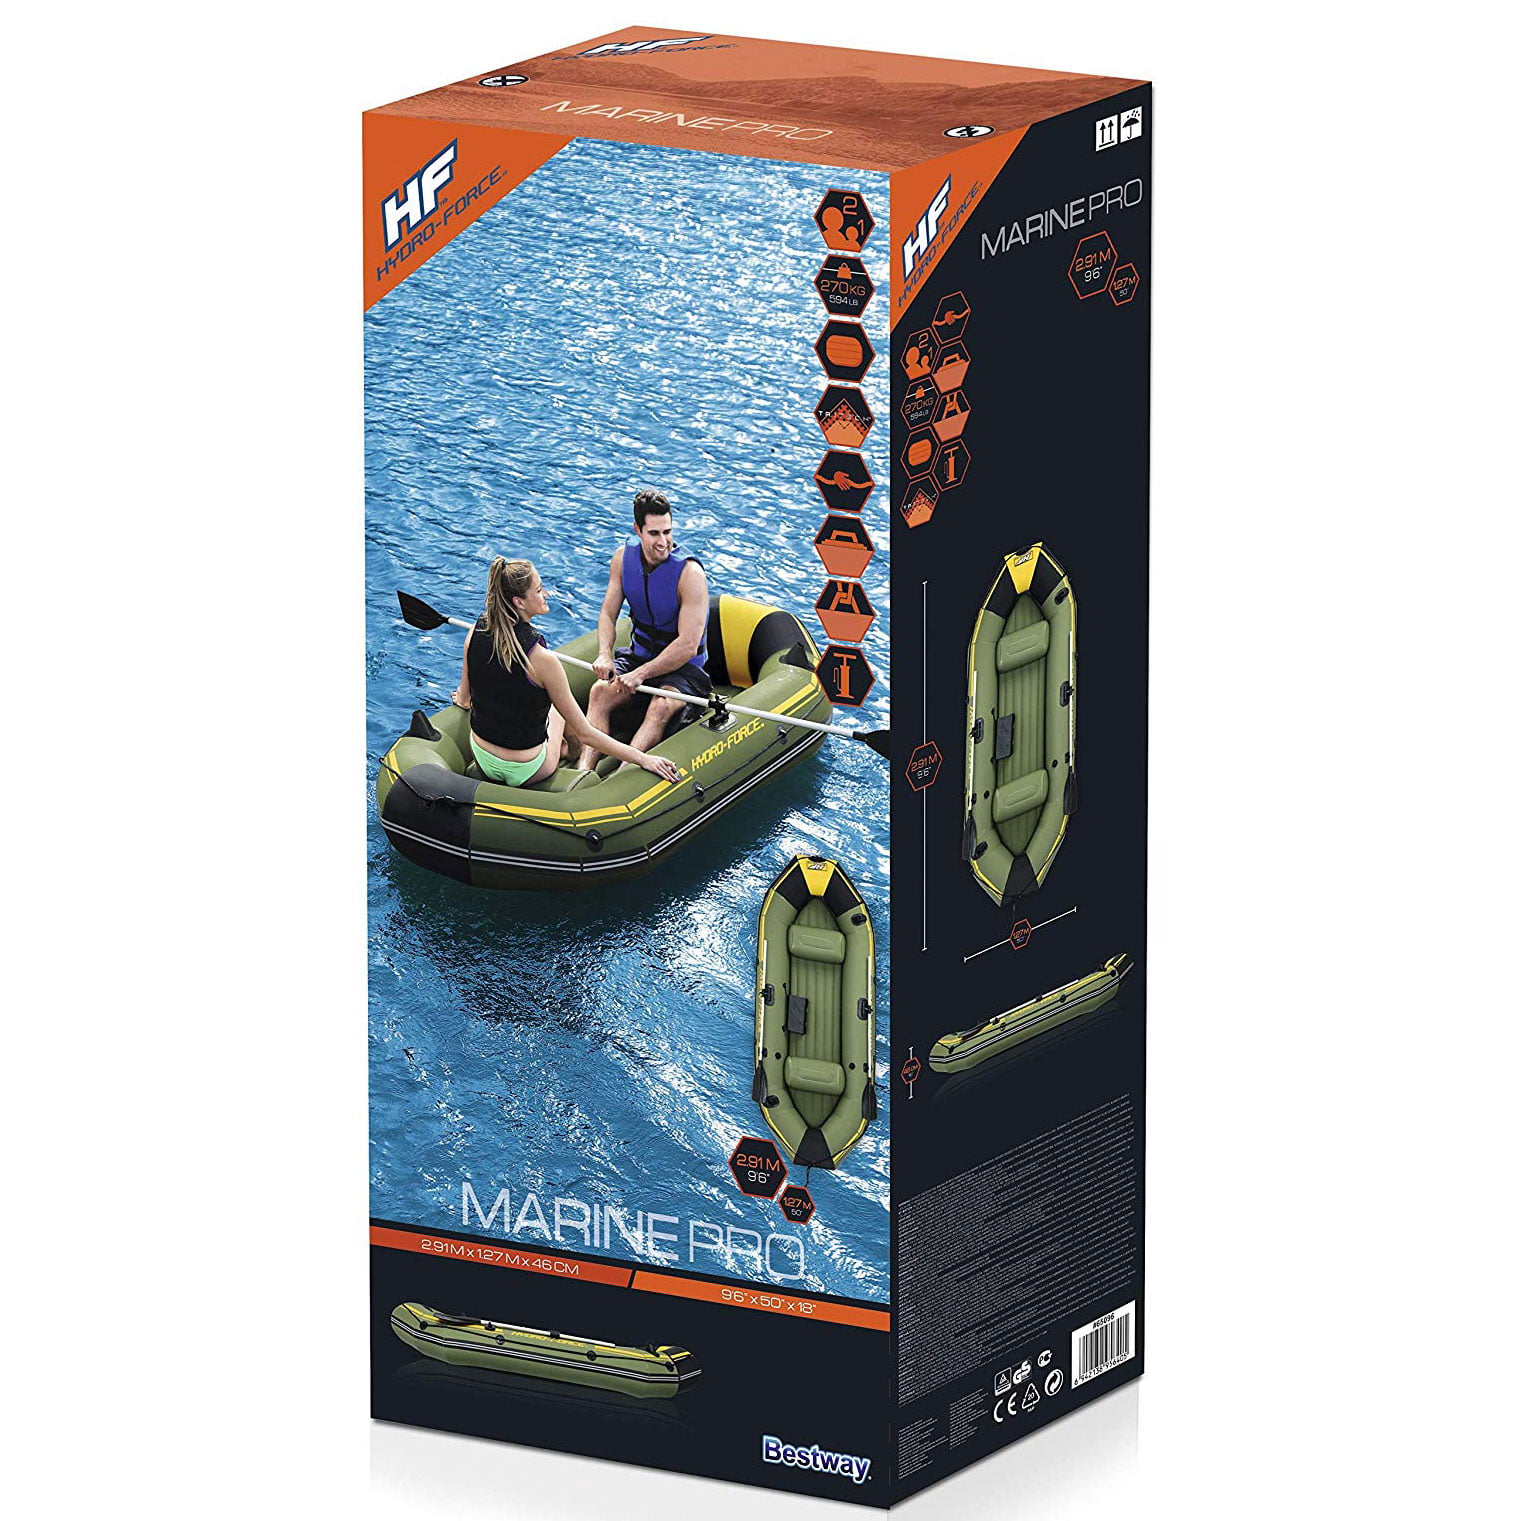 Sail kit for HydroForce or Ozark Trail Marine Pro Inflatable Raft Boat. 